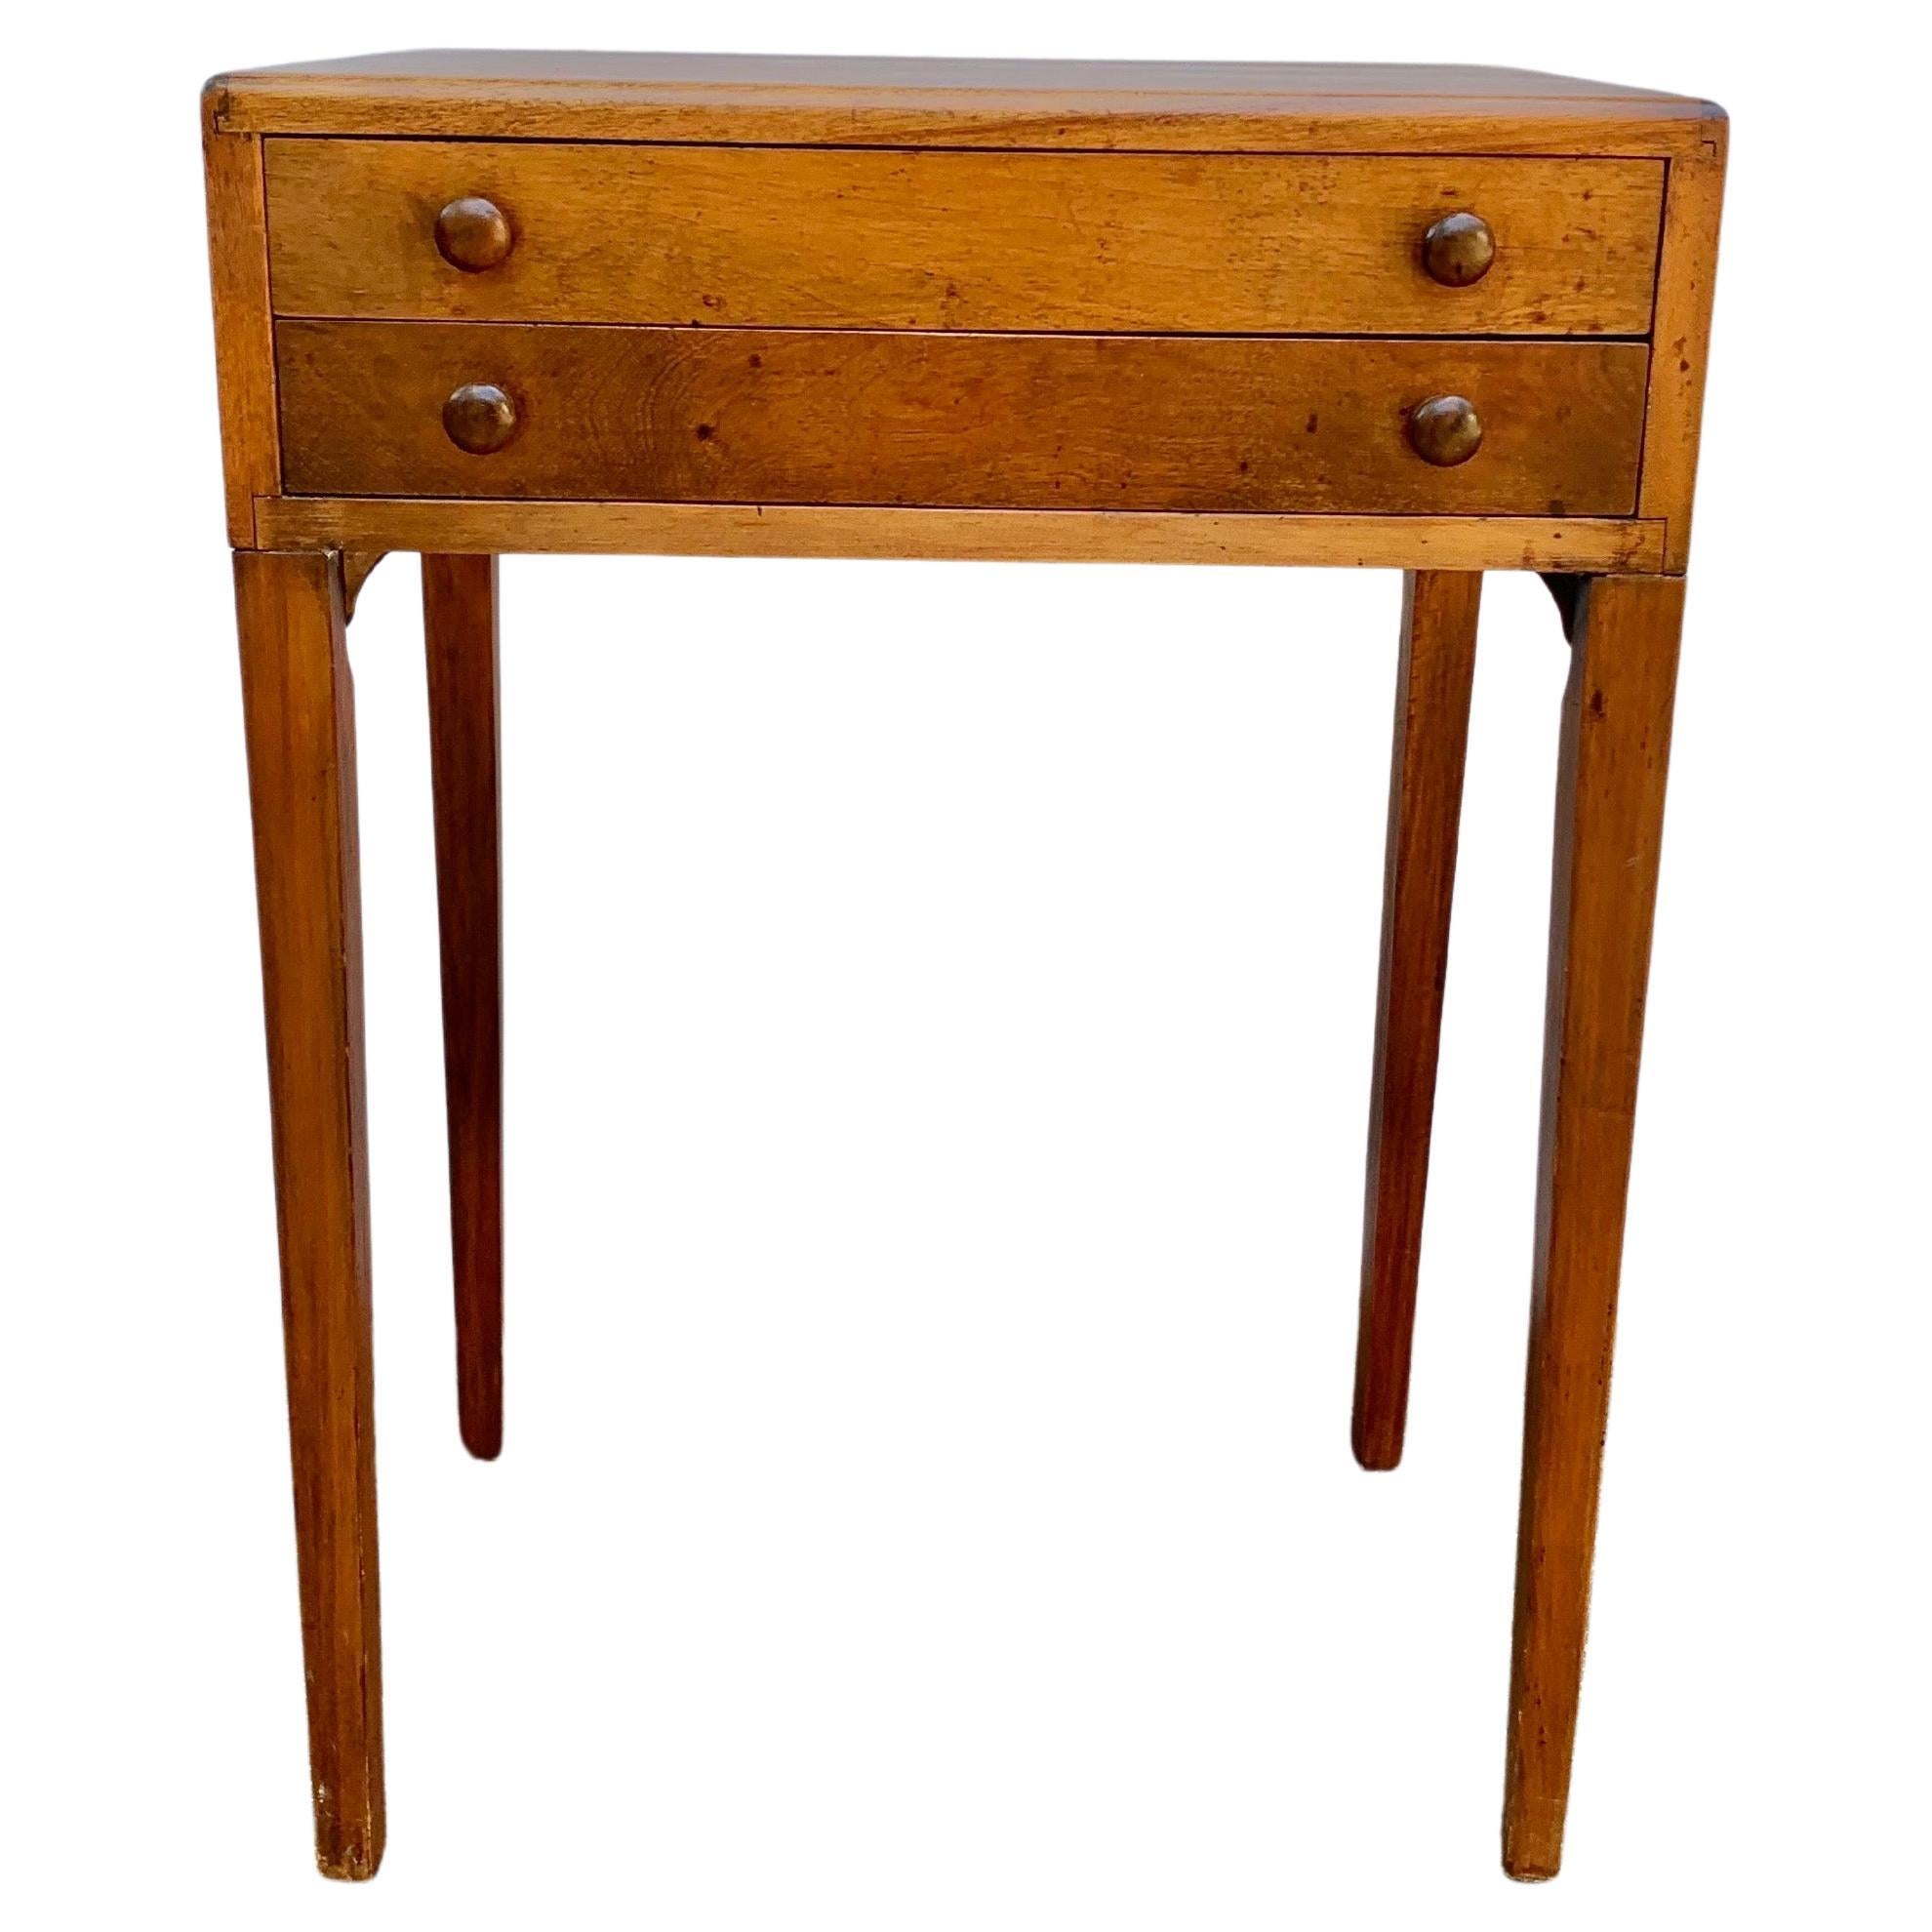 This Mid 20th Century Side Table was crafted from white Pine in the mid 1900's. The piece features a chest style top containing two slender drawers restng on four tapered legs. Each of the two drawers retain their original wood pulls. This Mid 20th